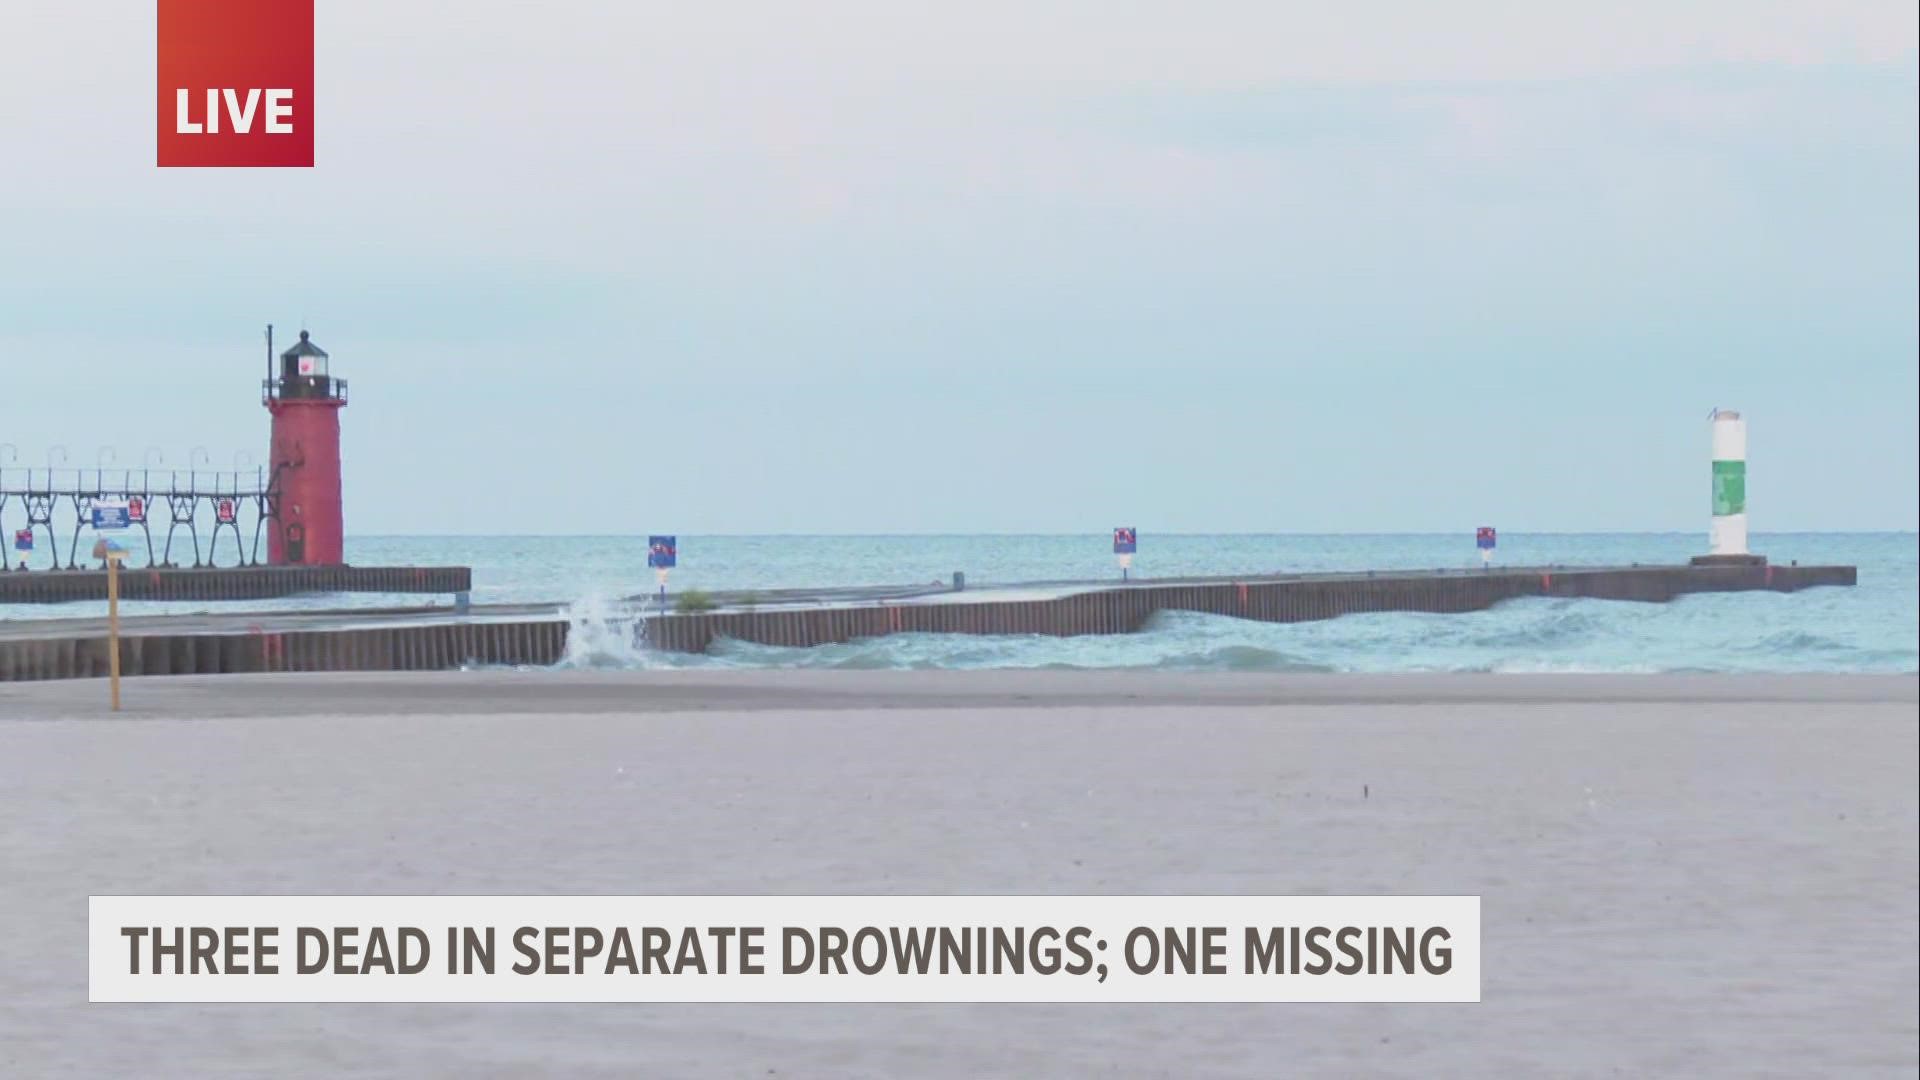 Three people have drowned, and the search is ongoing to find another man who is presumed dead in Lake Michigan.